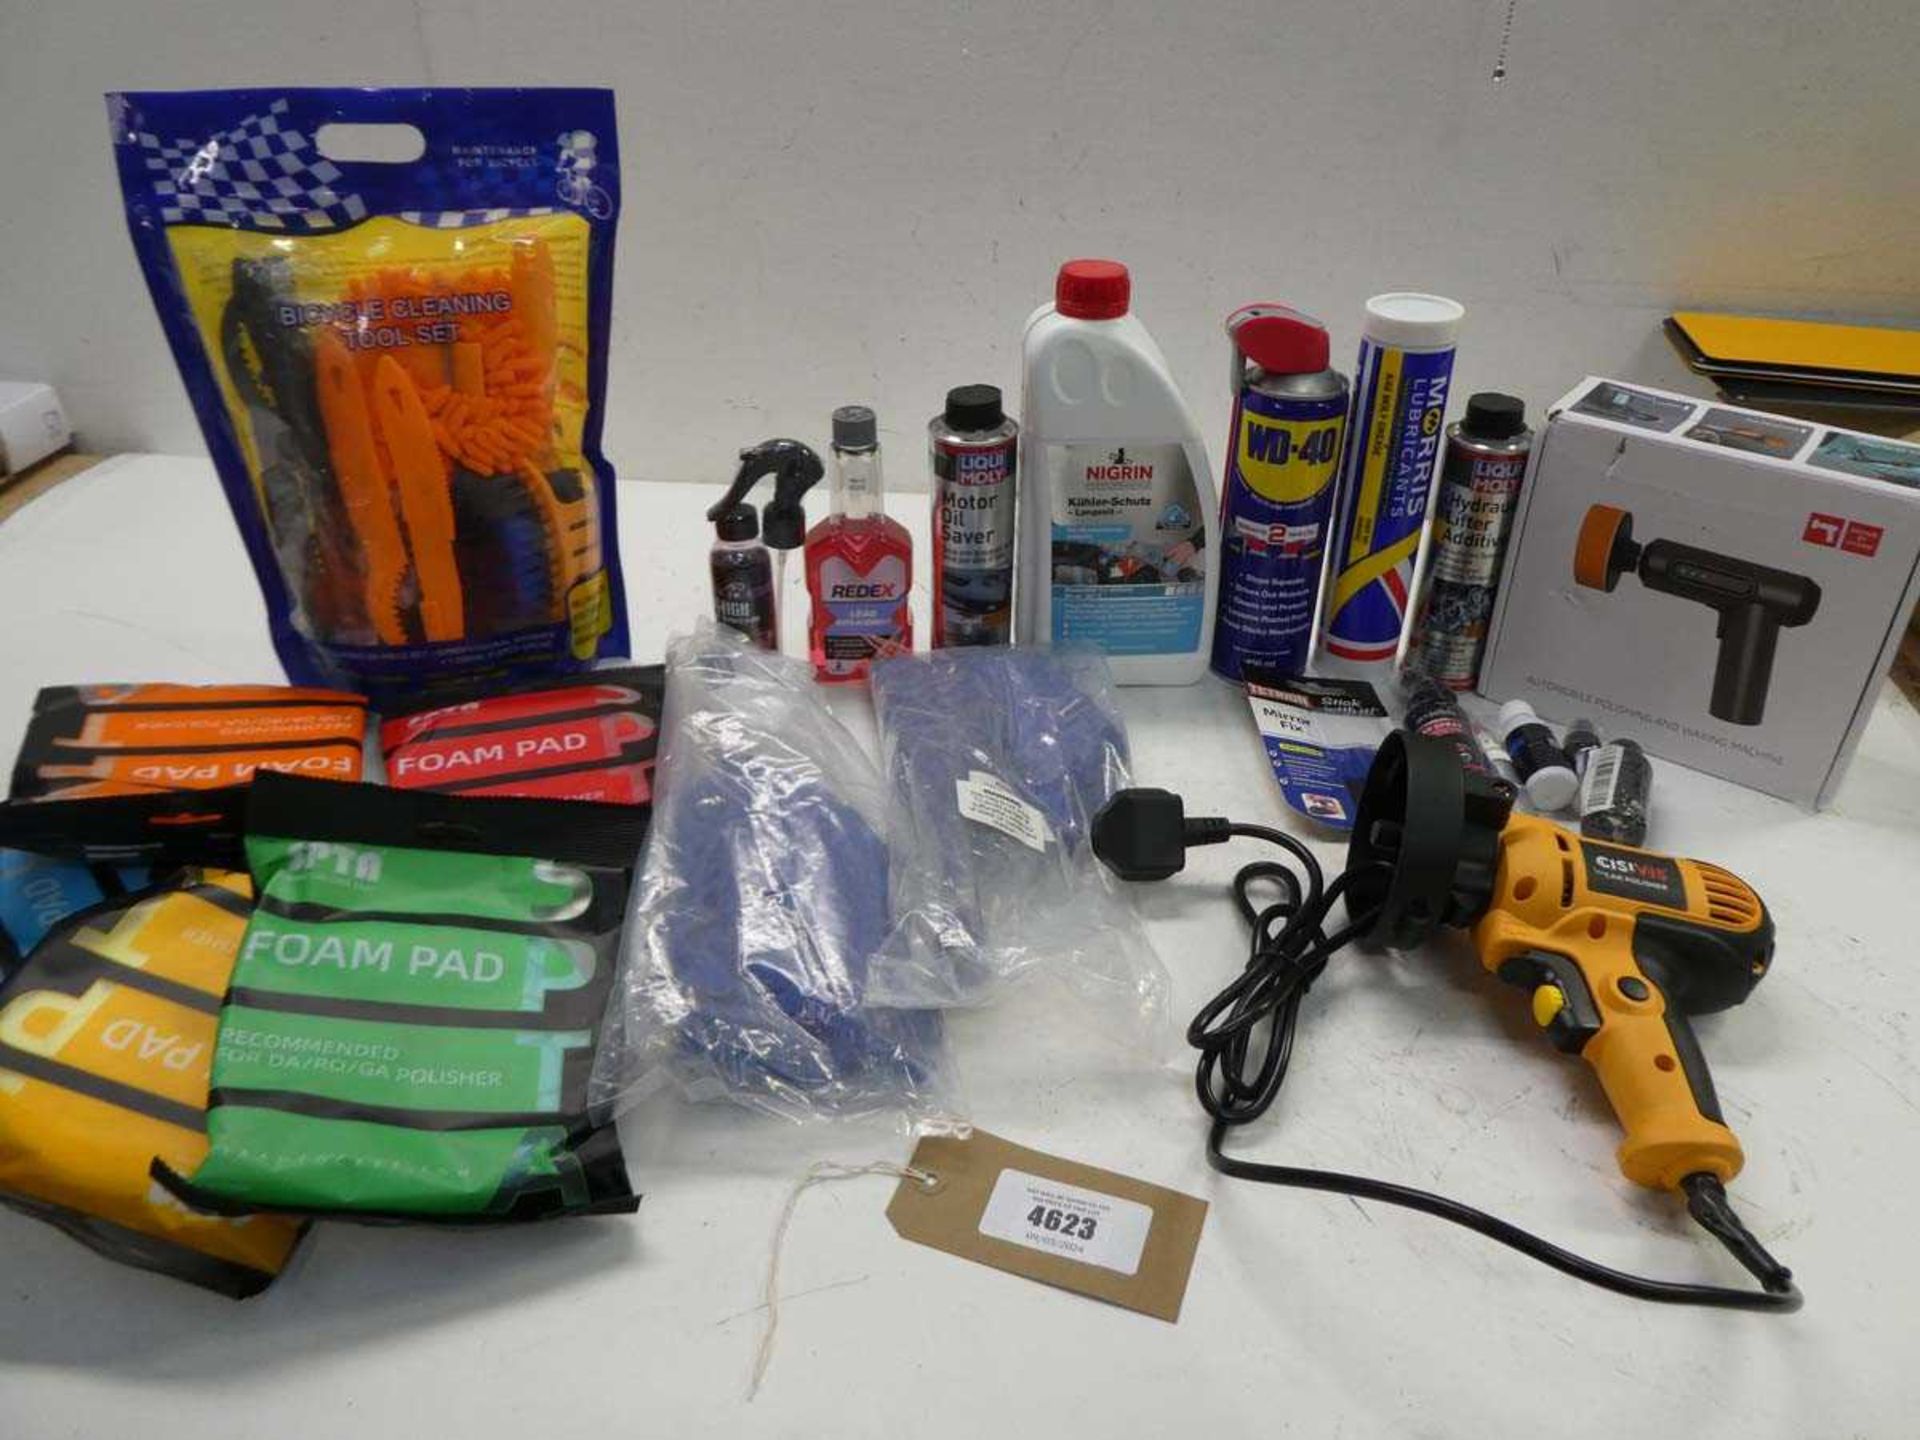 +VAT Auto polishers, WD-40, Hydraulic lifter, Motor oil saver, Lead replacement, bike cleaning